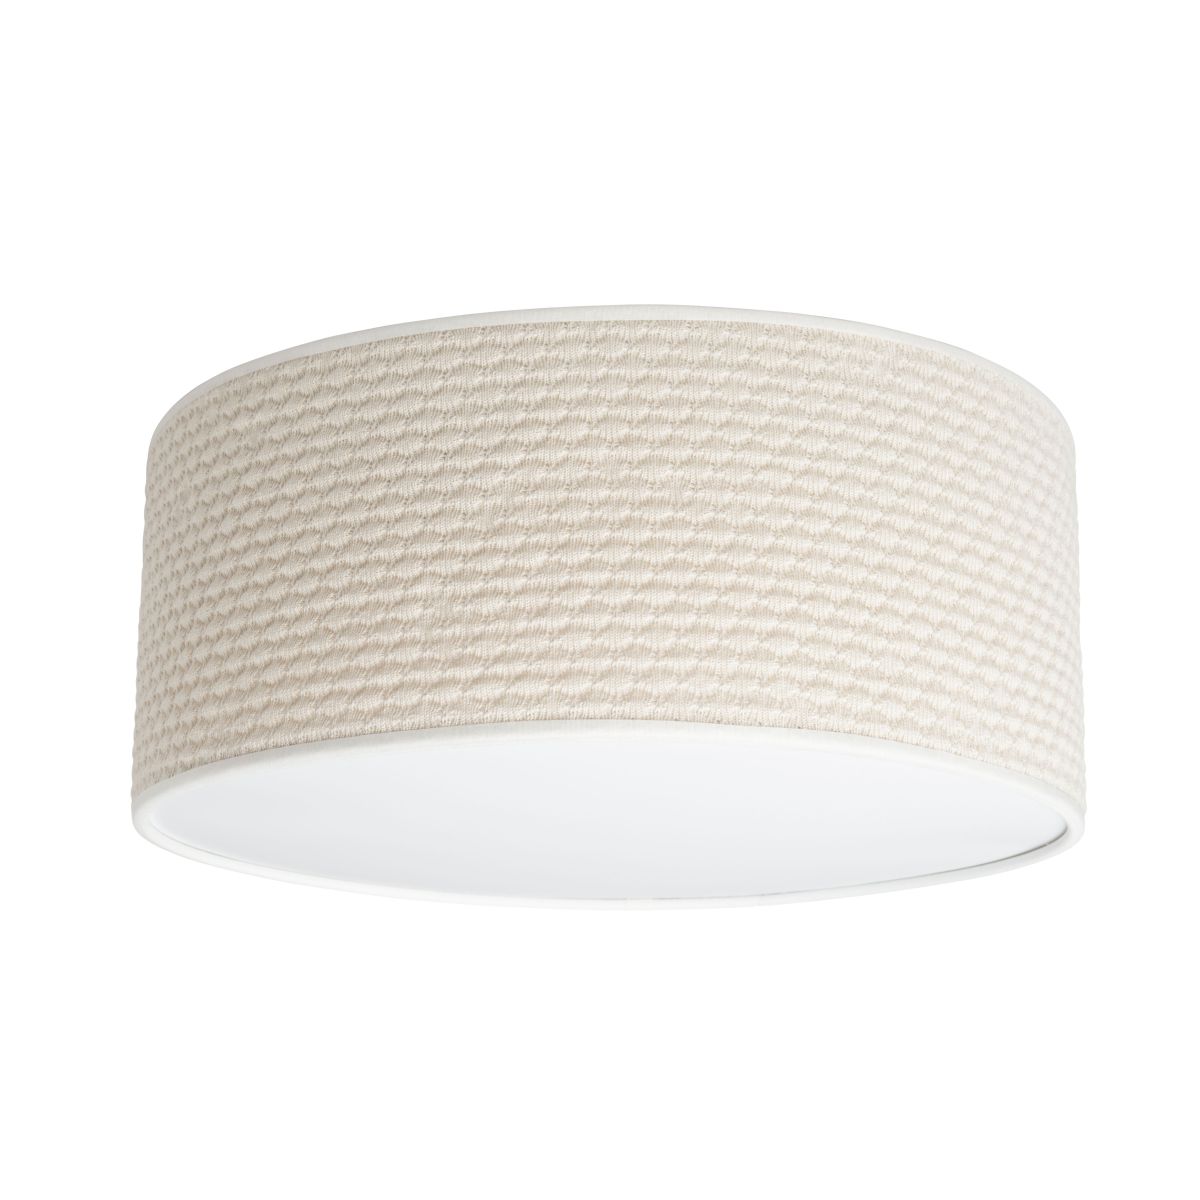 Baby’s Only Ceiling Lamp Sky – Ø35 cm. von Baby's Only